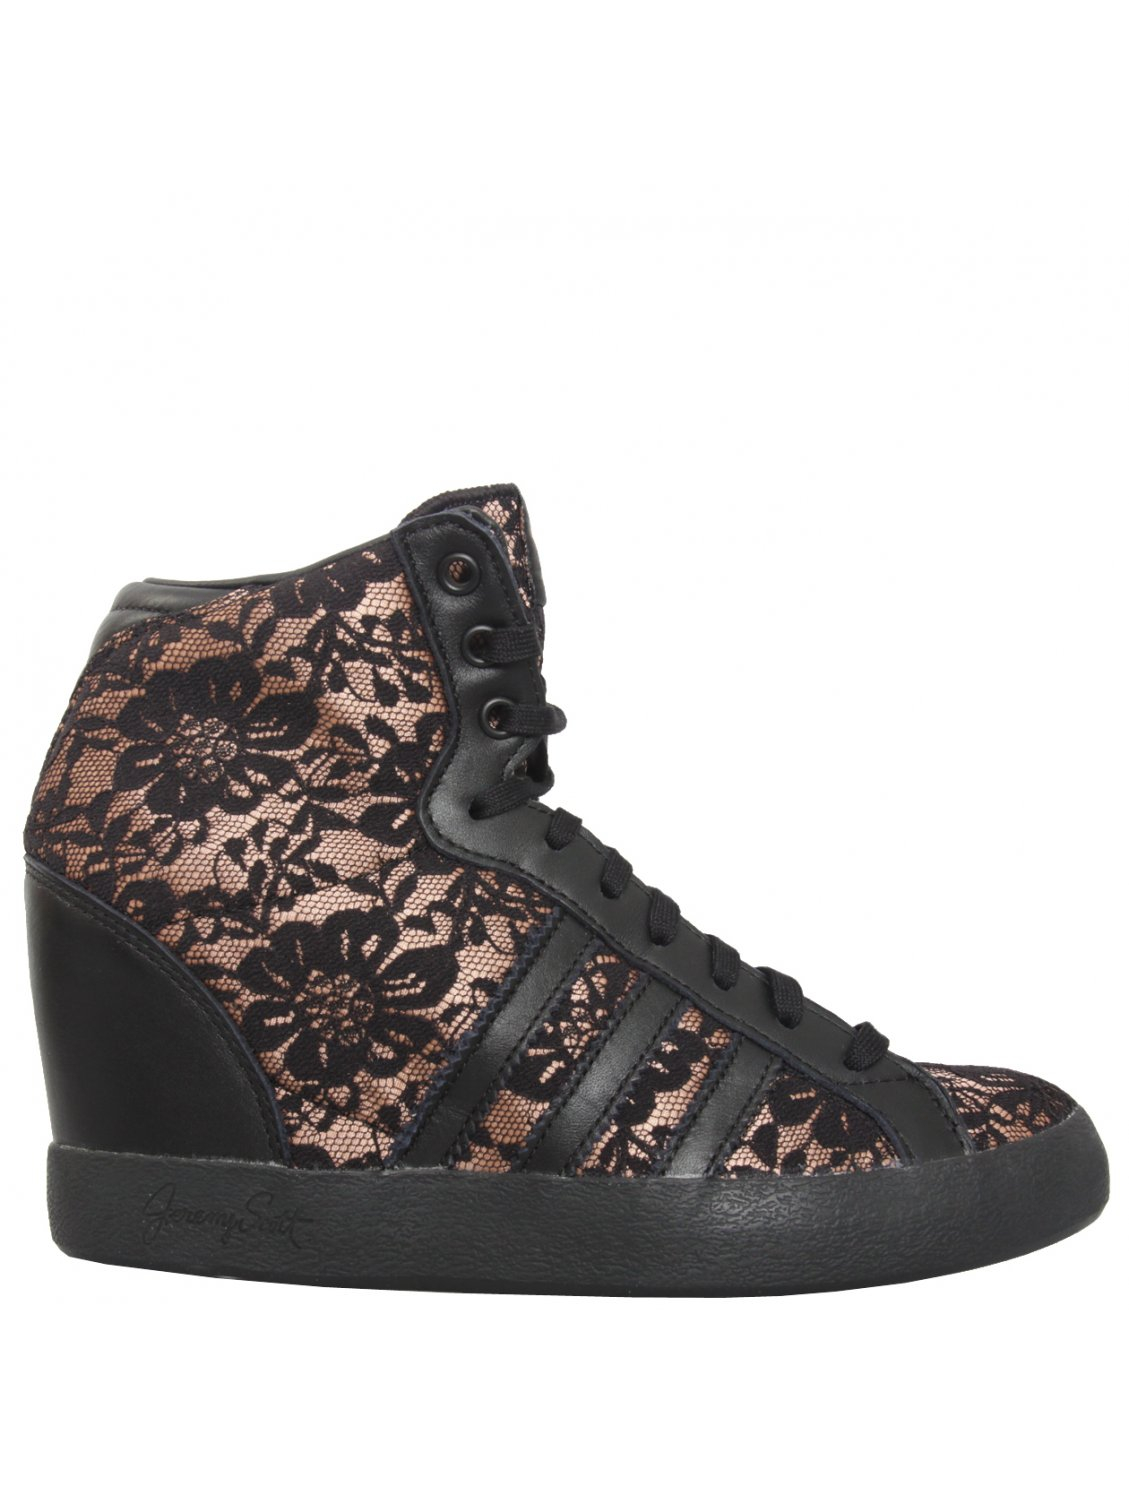 Jeremy Scott For Adidas Lace Wedge Sneakers Black in Black | Lyst